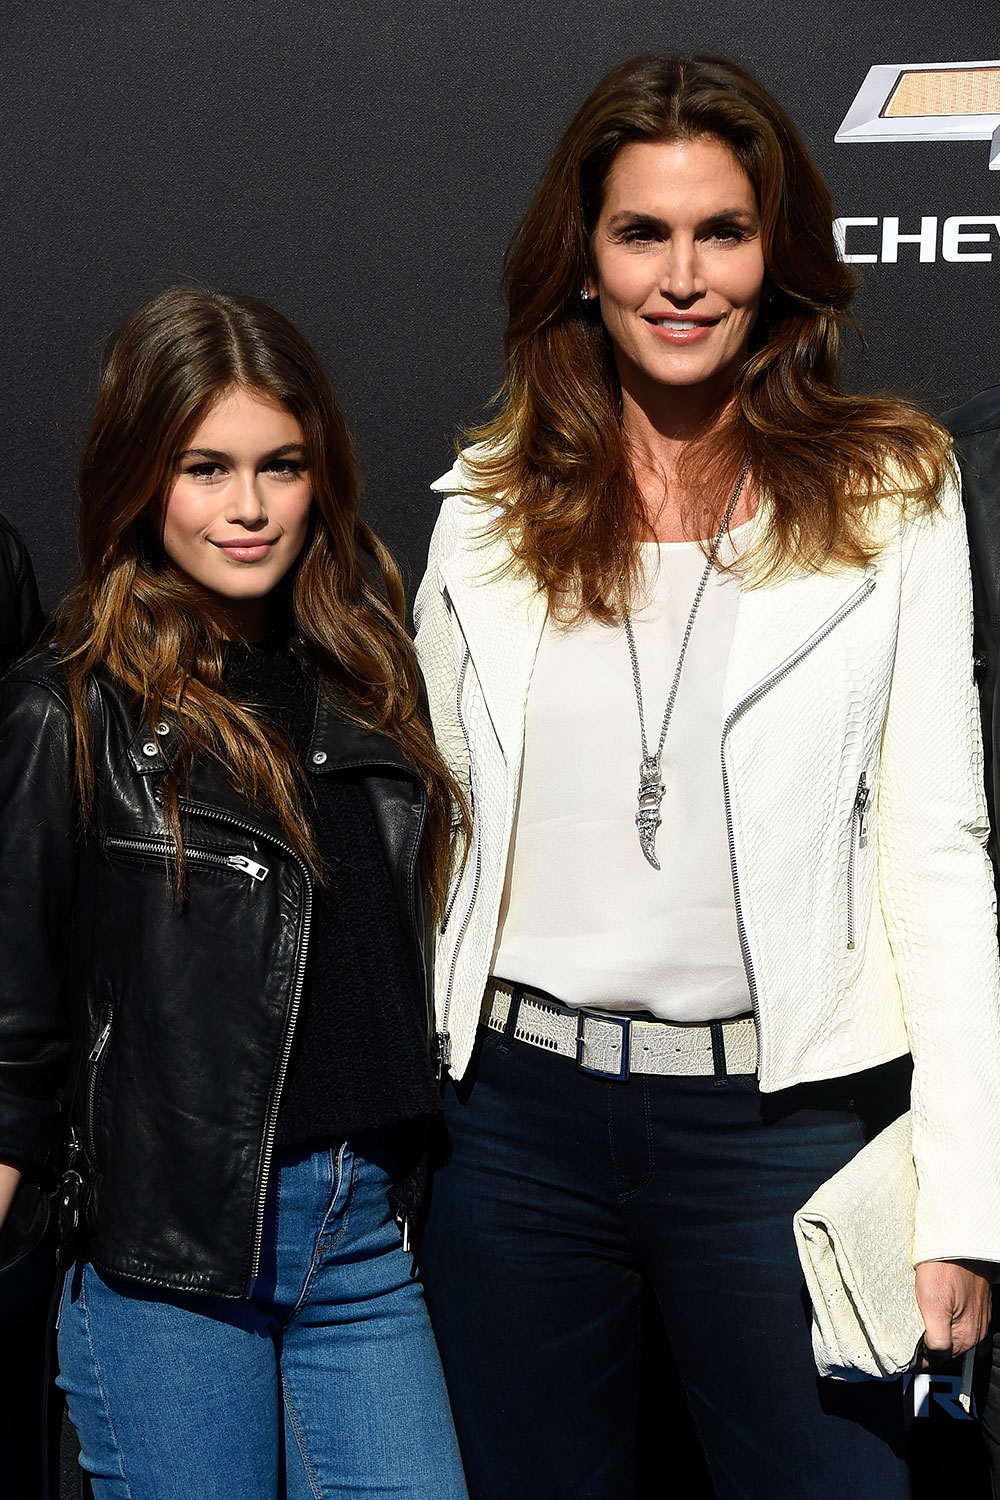 But there’s no mistaking that this up and comer—who has already modelled for Vogue Italia and CR Fashion Book—shares Cindy Crawford’s DNA. Photo / Getty Images